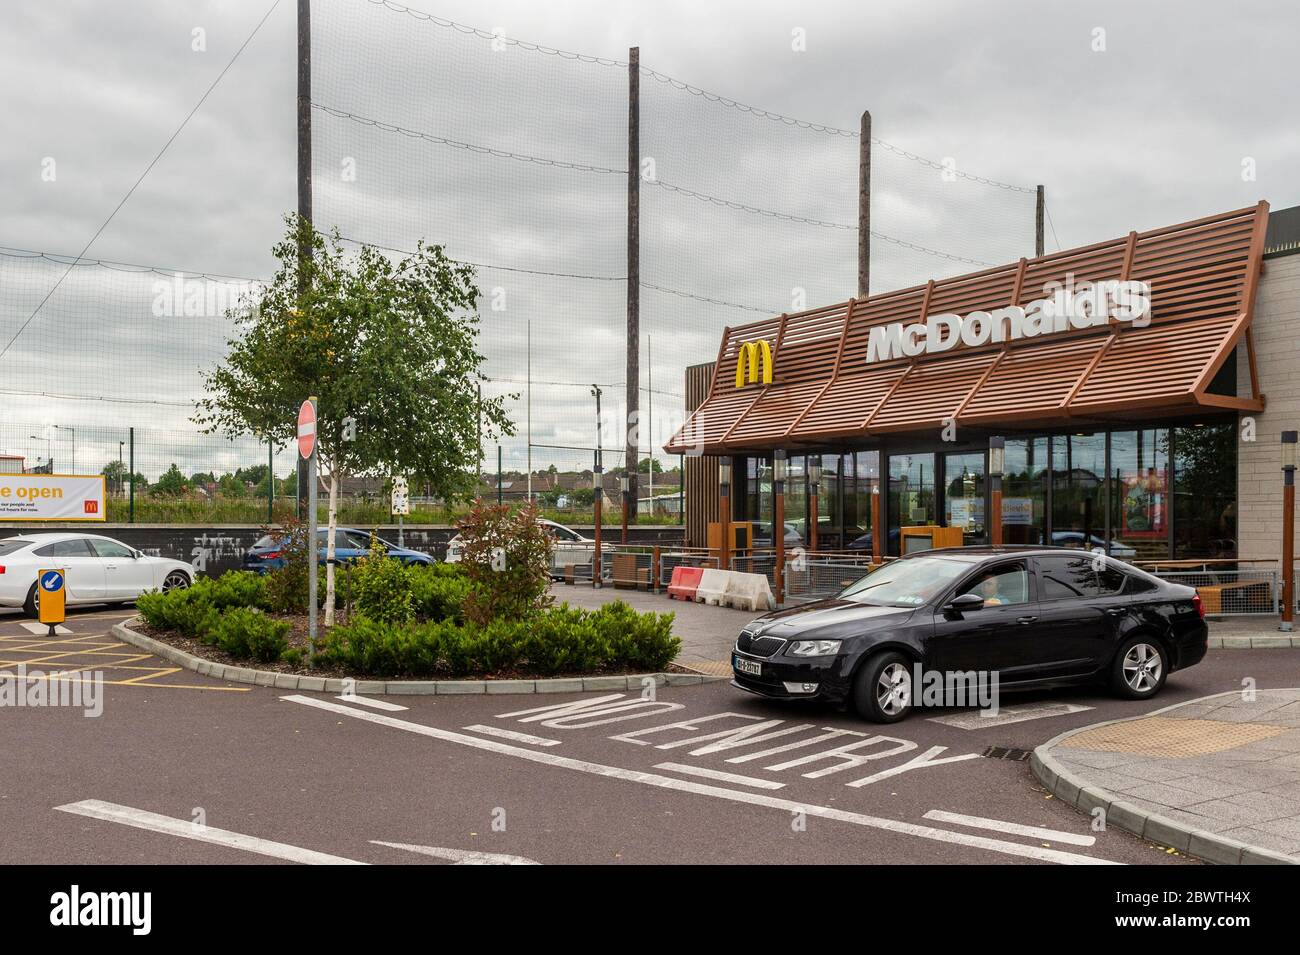 Cork, Ireland. 3rd June, 2020. McDonald's Drive-Thru reopened at 11am this morning after being closed for over 2 months due to the Covid-19 Pandemic. There were big queues of cars waiting to be served at the fast food restaurant. Credit: AG News/Alamy Live News Stock Photo